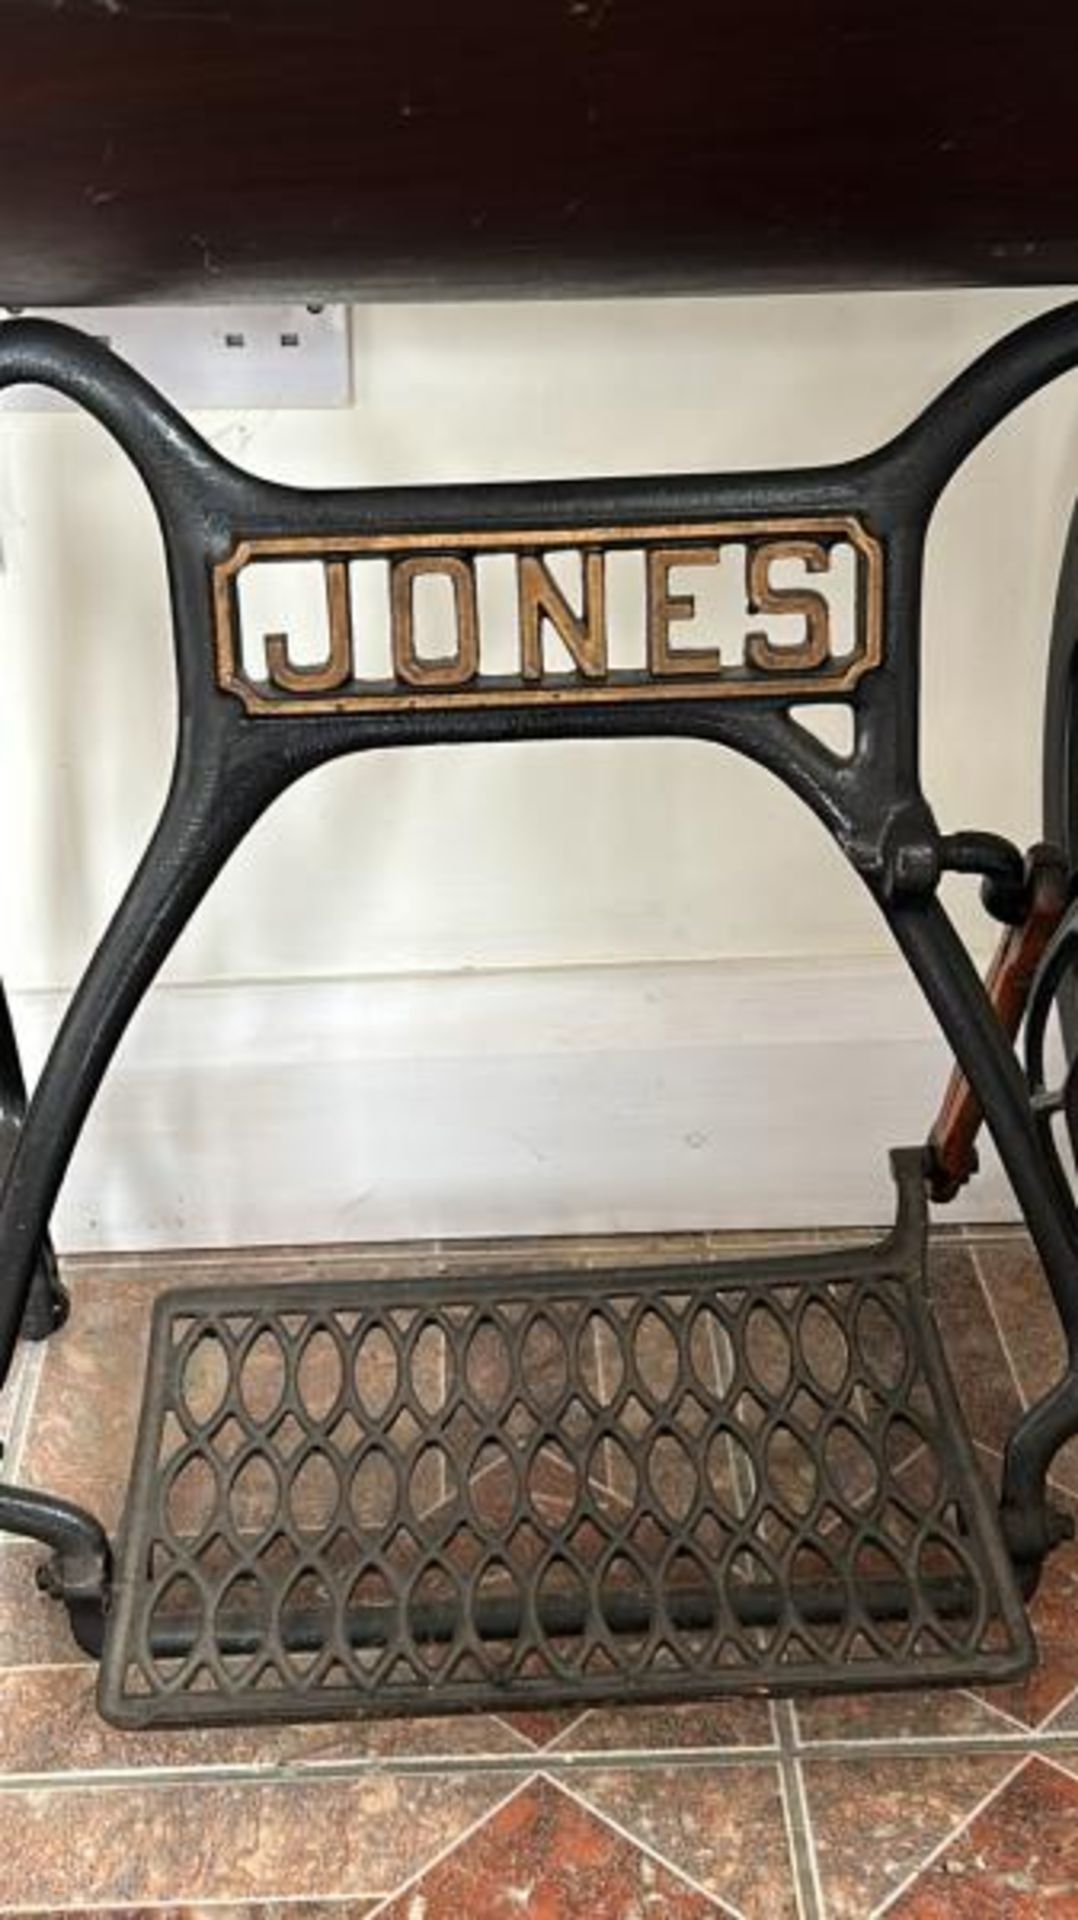 Jones sewing machine number 33225 with flip top table 75cm high (collection from private residence - Image 9 of 11